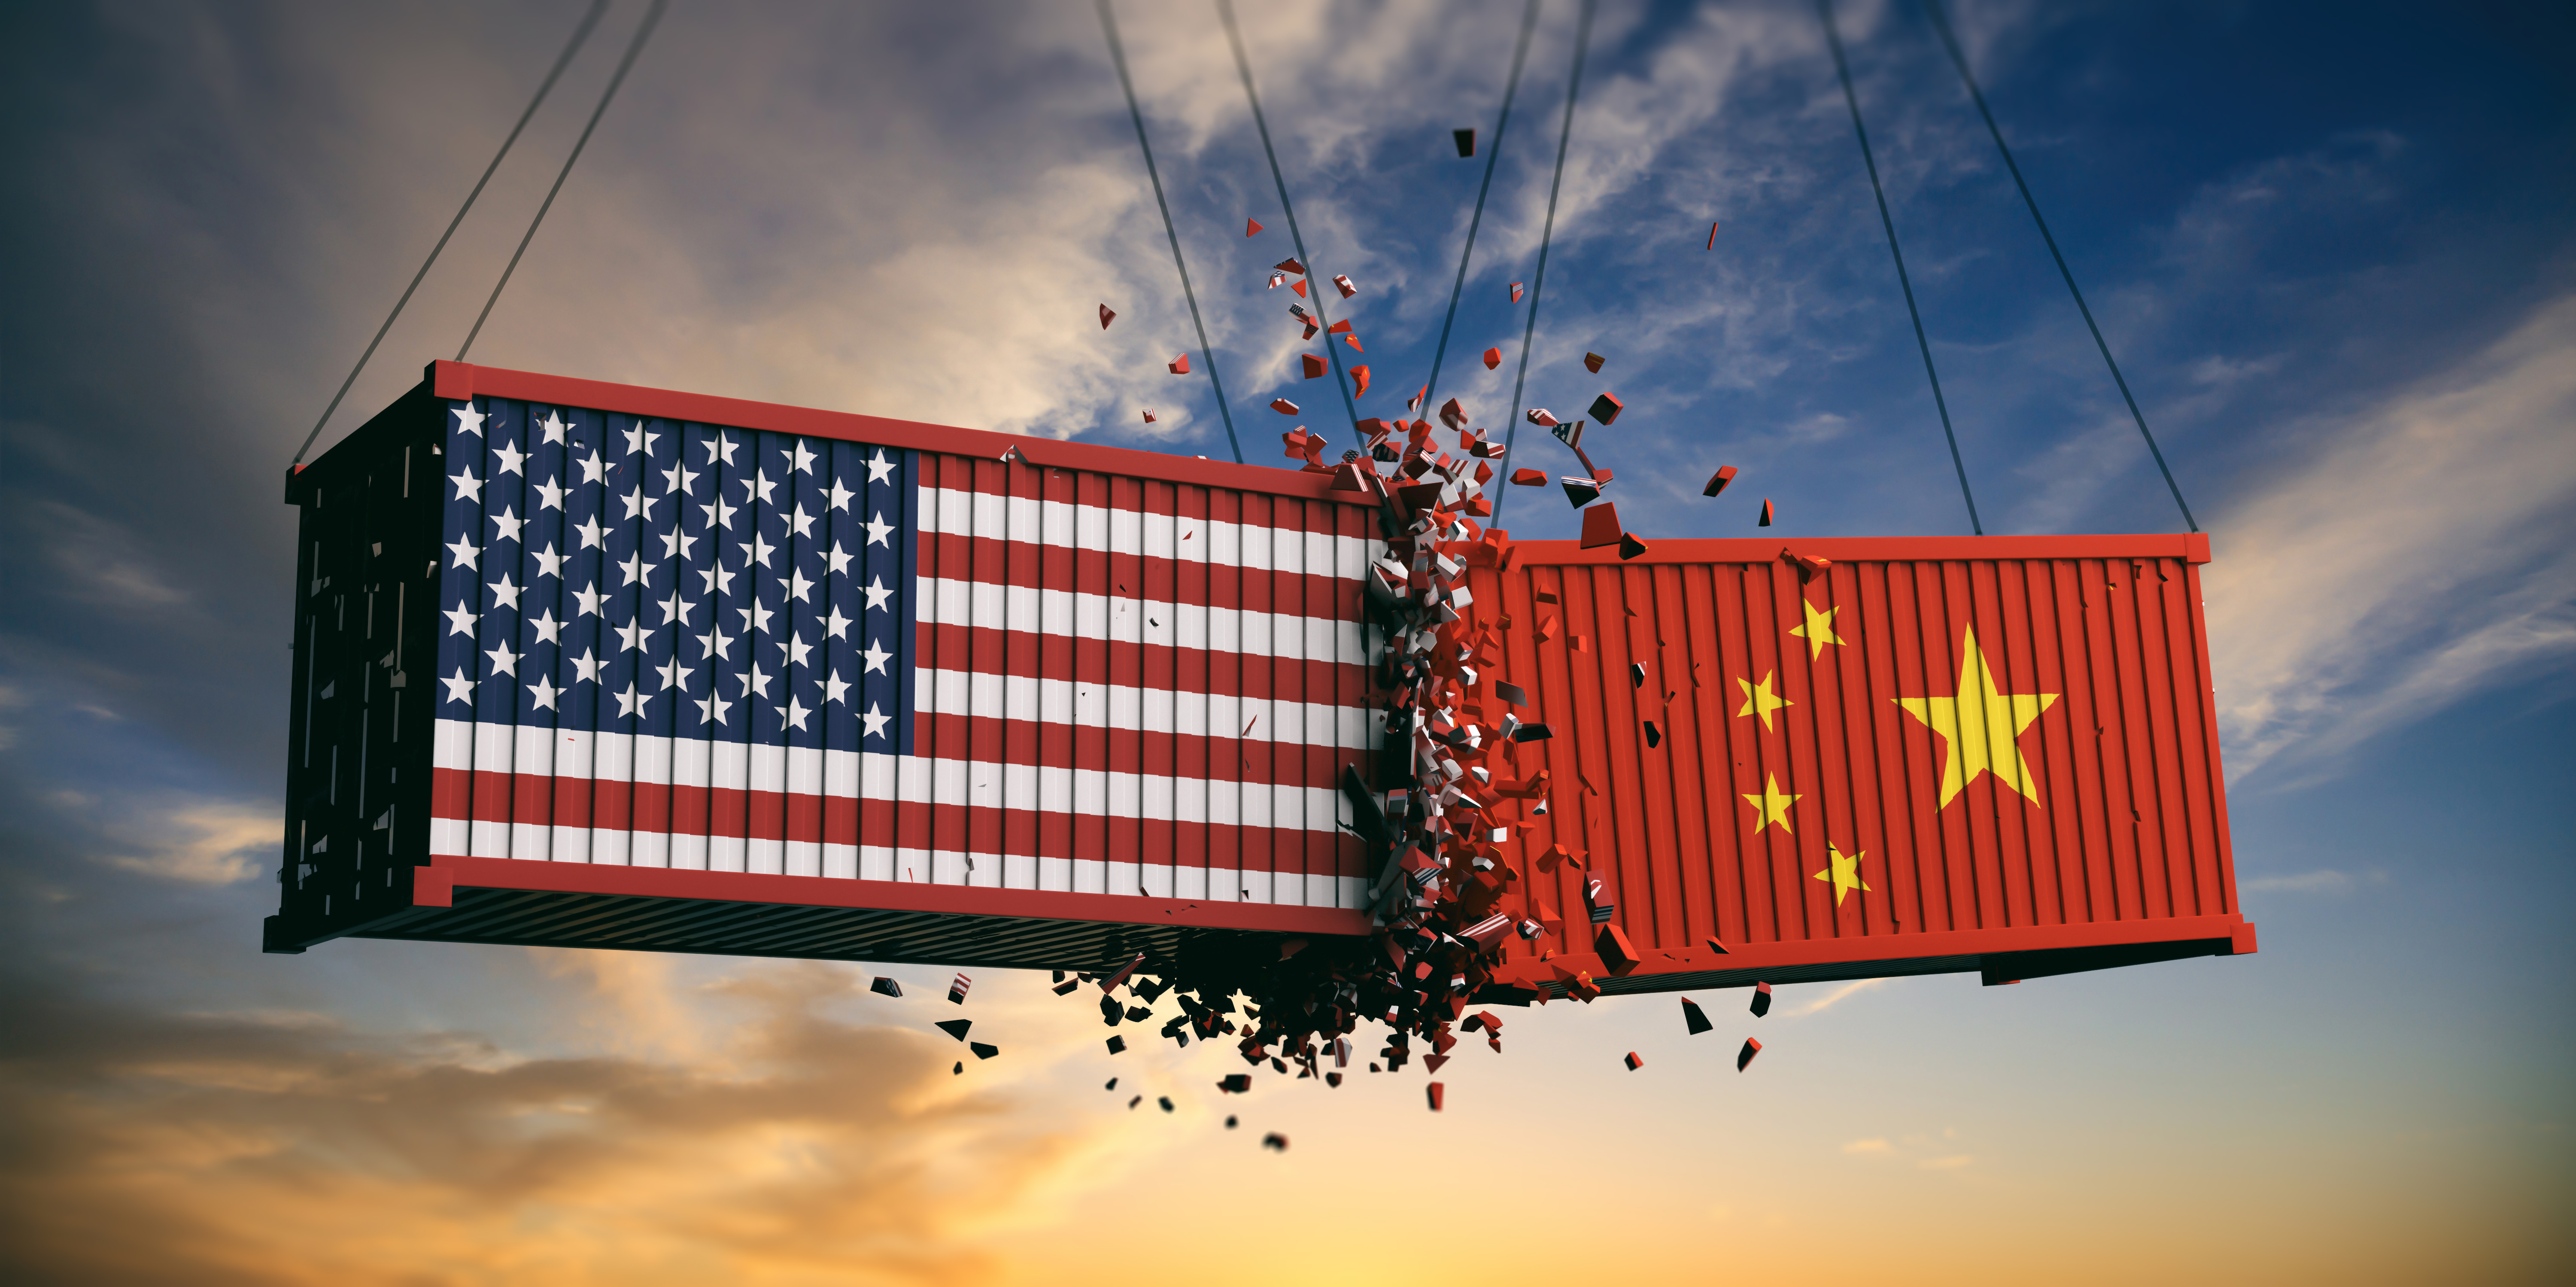 Two cargo containers crashing into one another depicting the US-China trade war